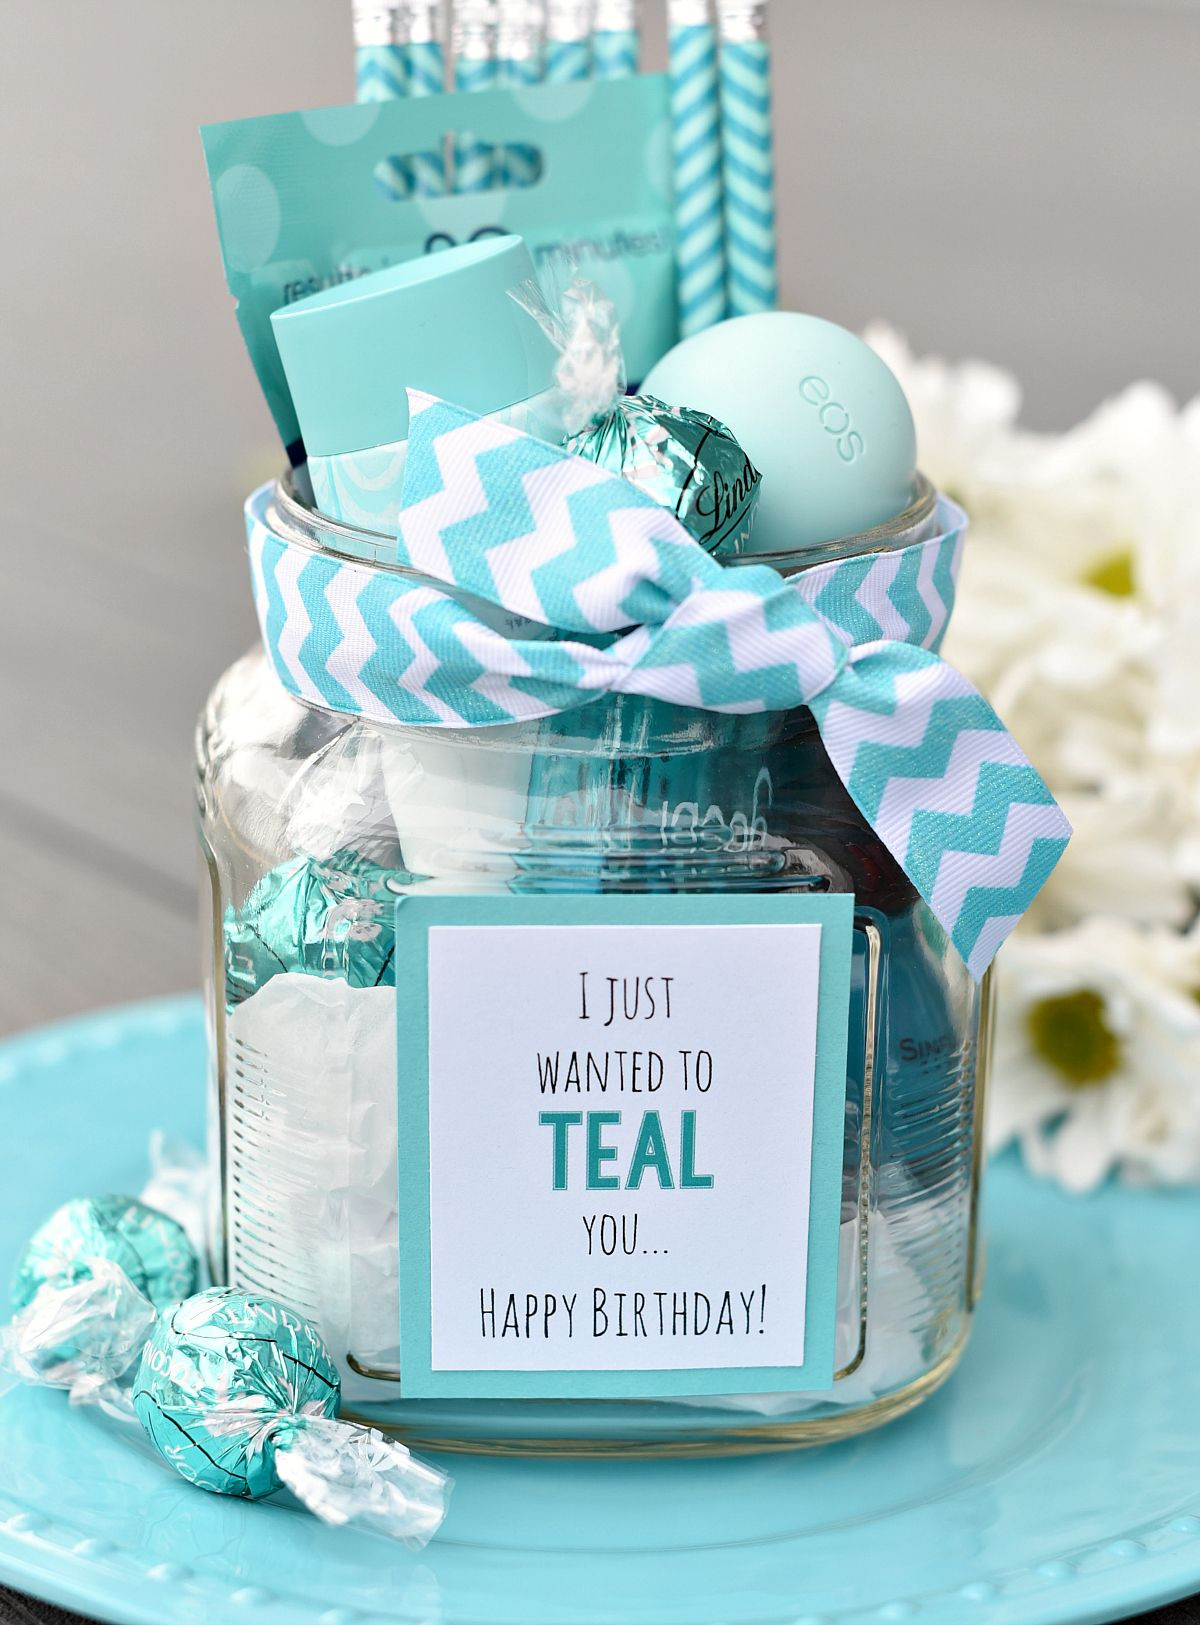 Gift Ideas For Mother'S Birthday
 Teal Birthday Gift Idea for Friends Confetti